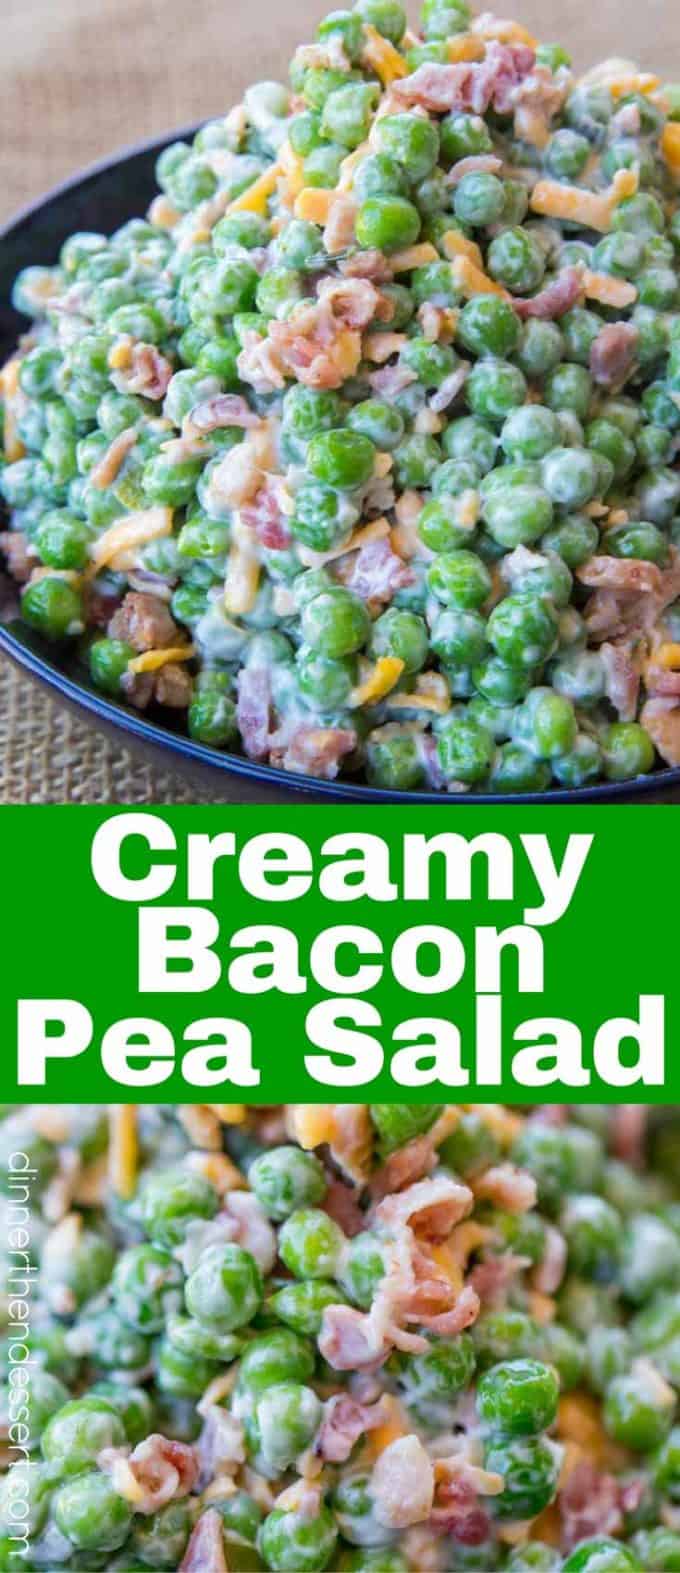 We love this cold creamy pea salad with bacon!